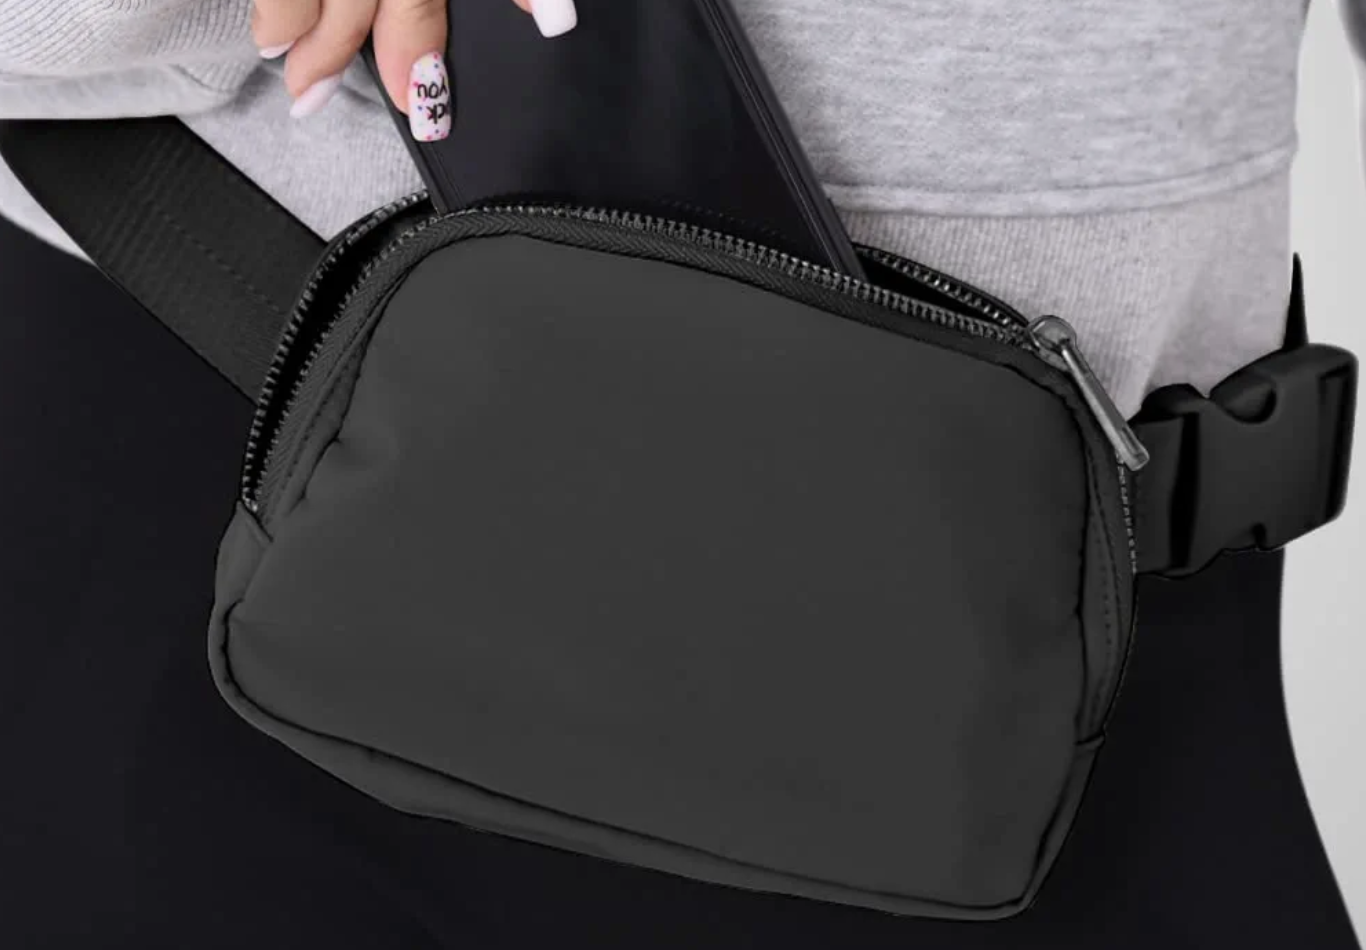 Get this lululemon Everywhere Belt Bag lookalike for only $15